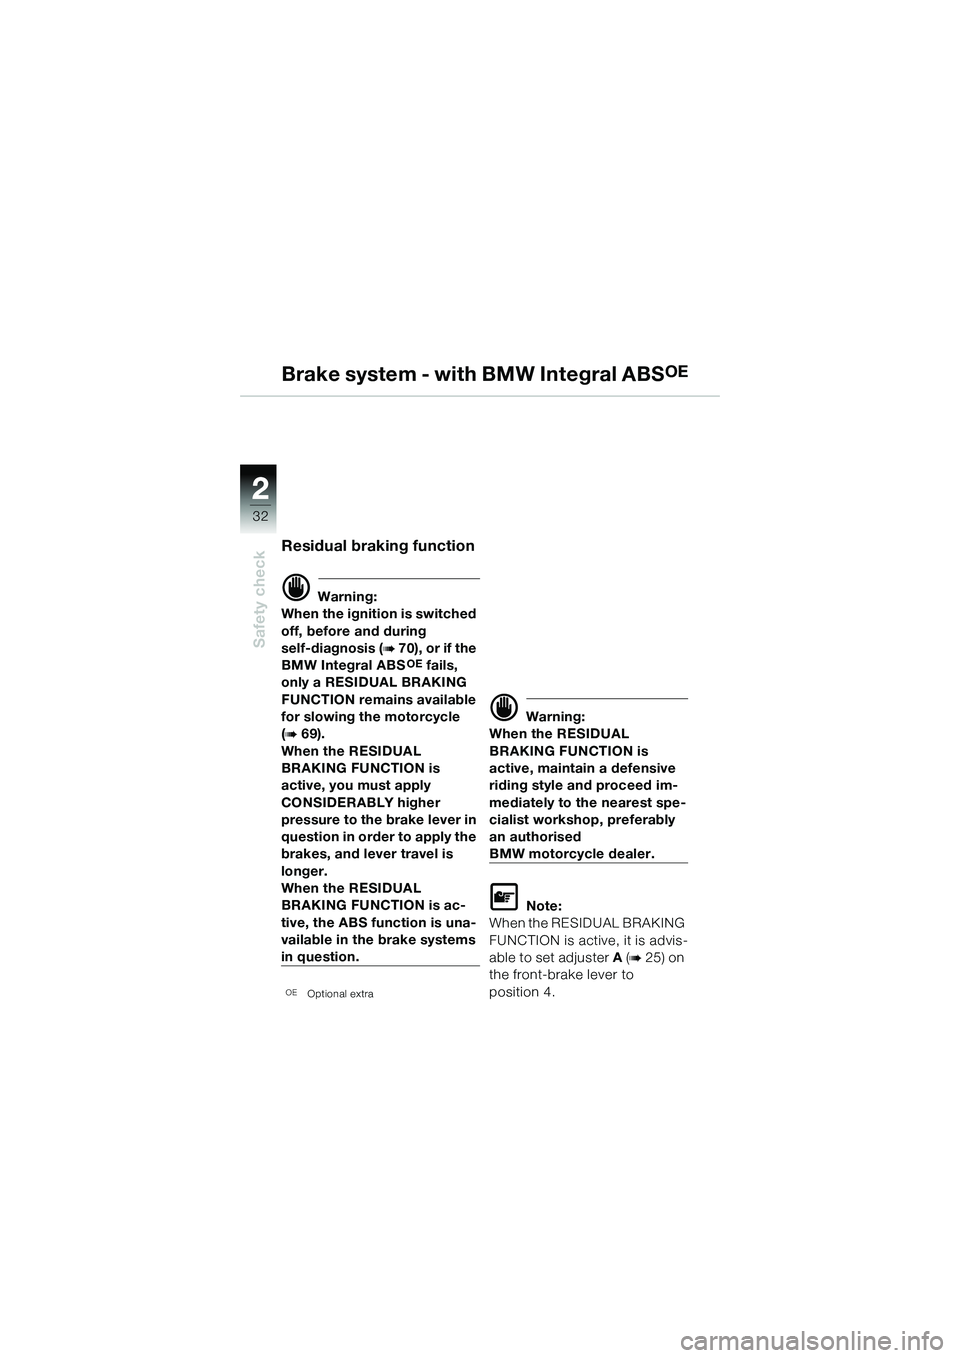 BMW MOTORRAD R 1150 R 2002  Riders Manual (in English) 22
32
Safety check
Residual braking function
d Warning:
When the ignition is switched 
off, before and during 
self-diagnosis (
b 70), or if the 
BMW Integral ABSOE fails, 
only a RESIDUAL BRAKING 
FU